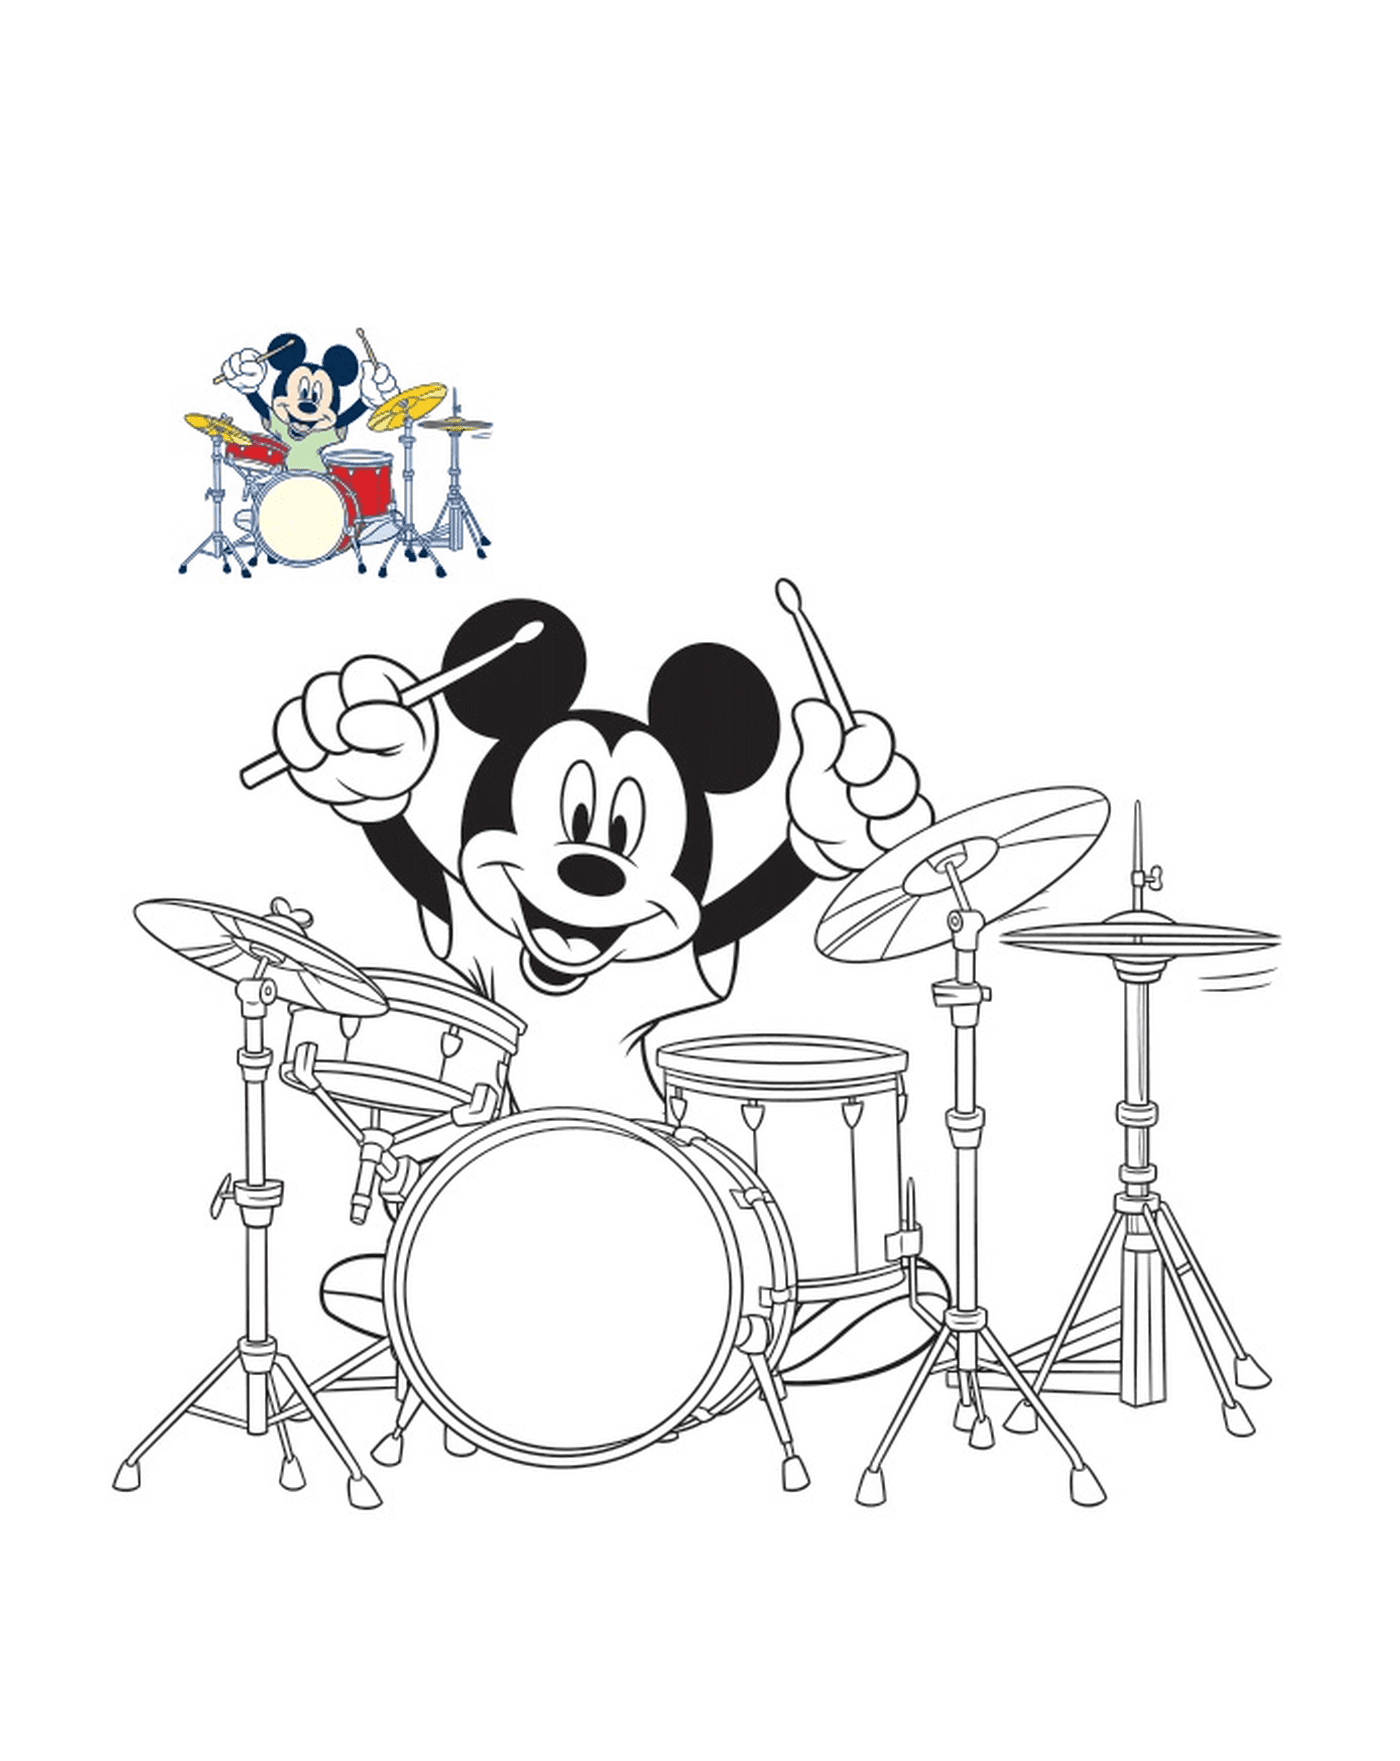  Mickey Mouse plays drums 